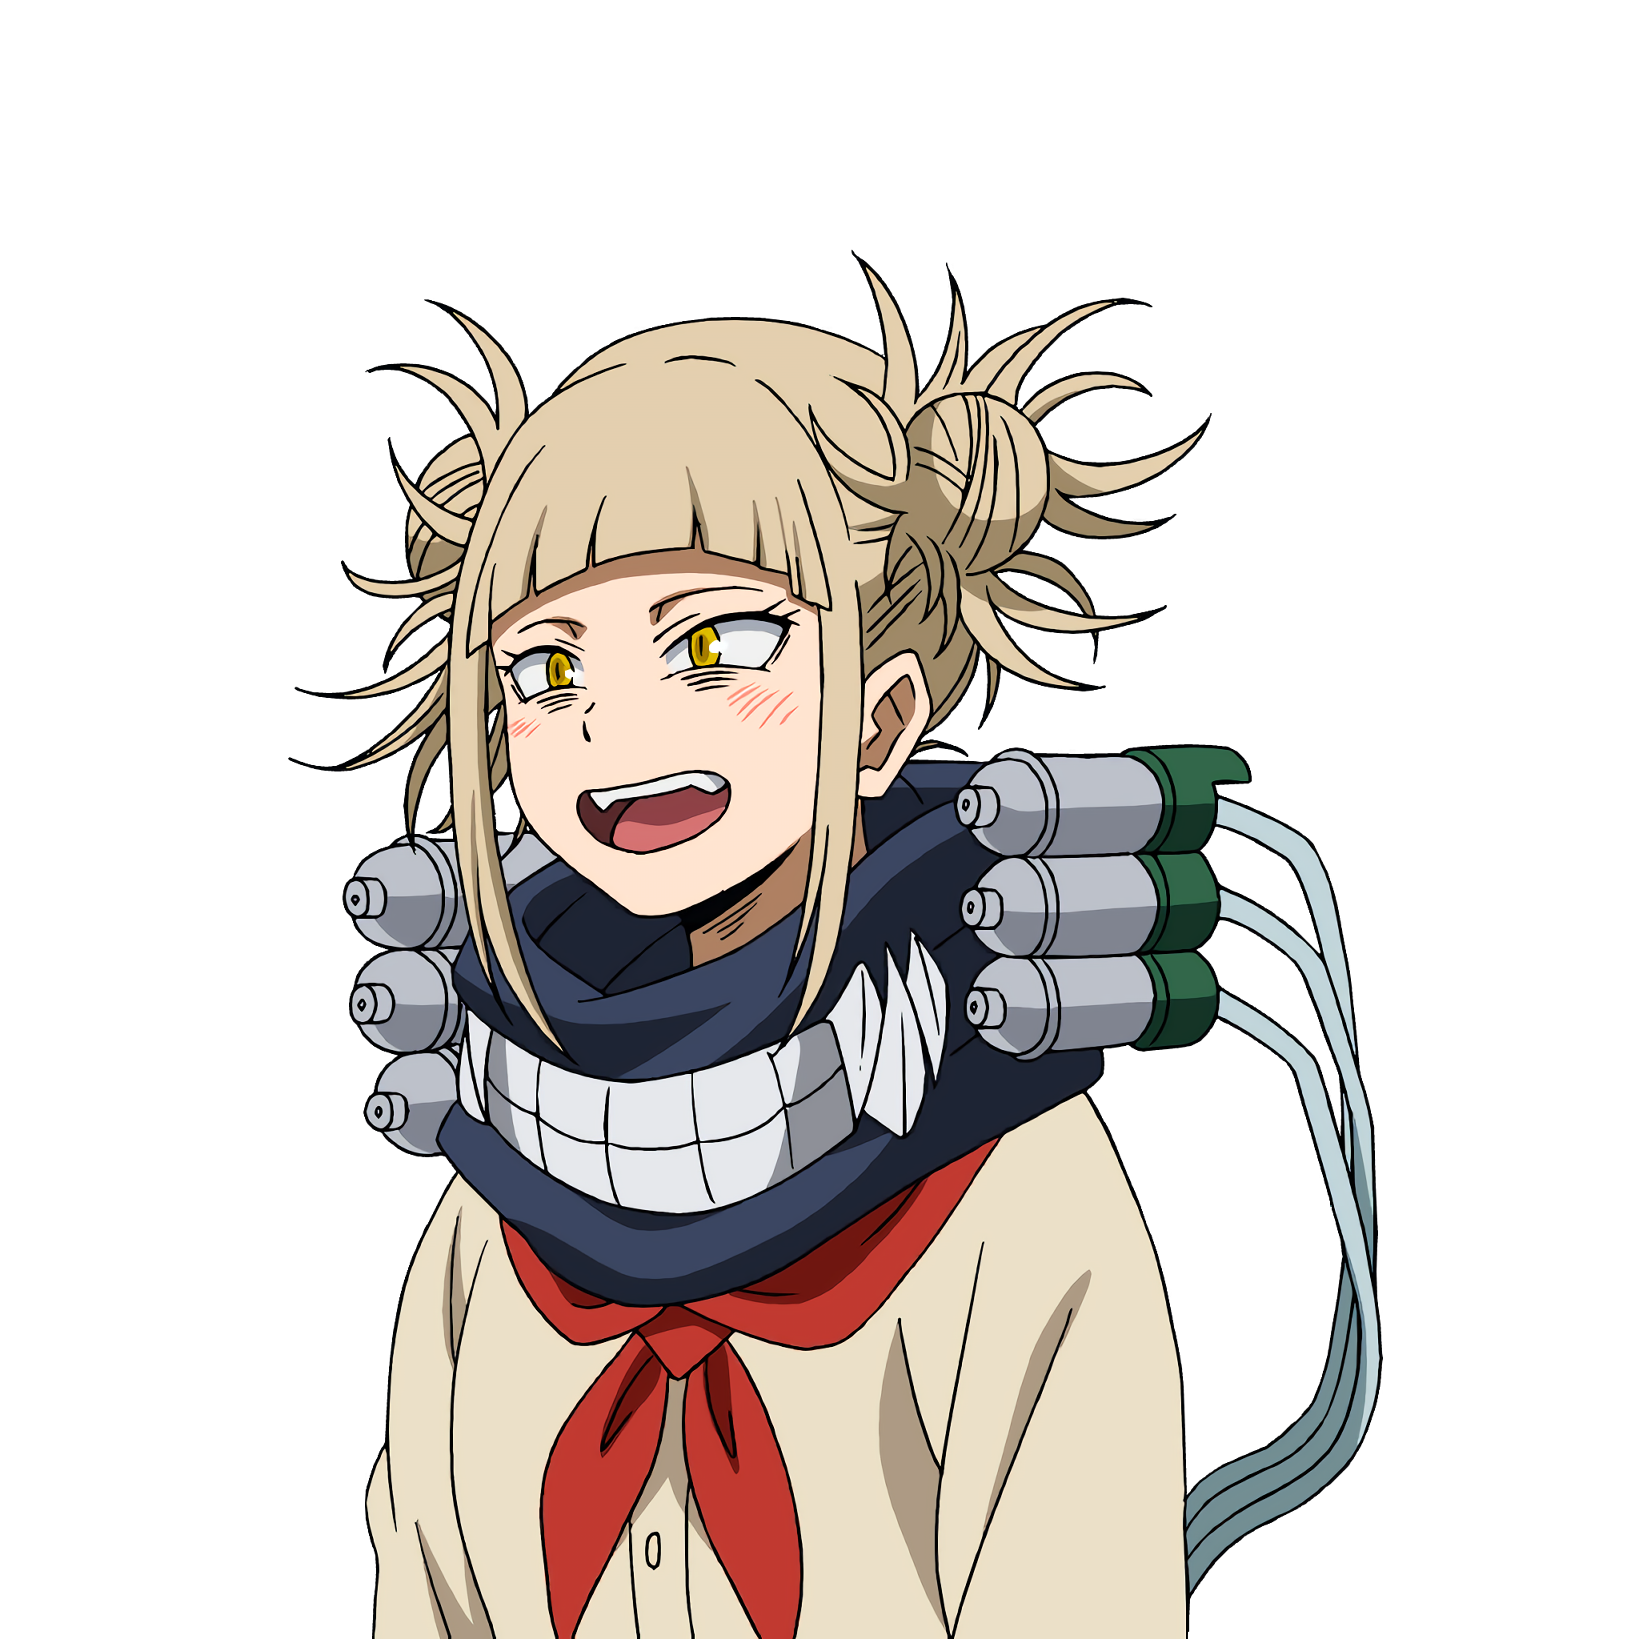 Himiko Toga render [My Hero One's Justice] by Maxiuchiha22 on DeviantArt